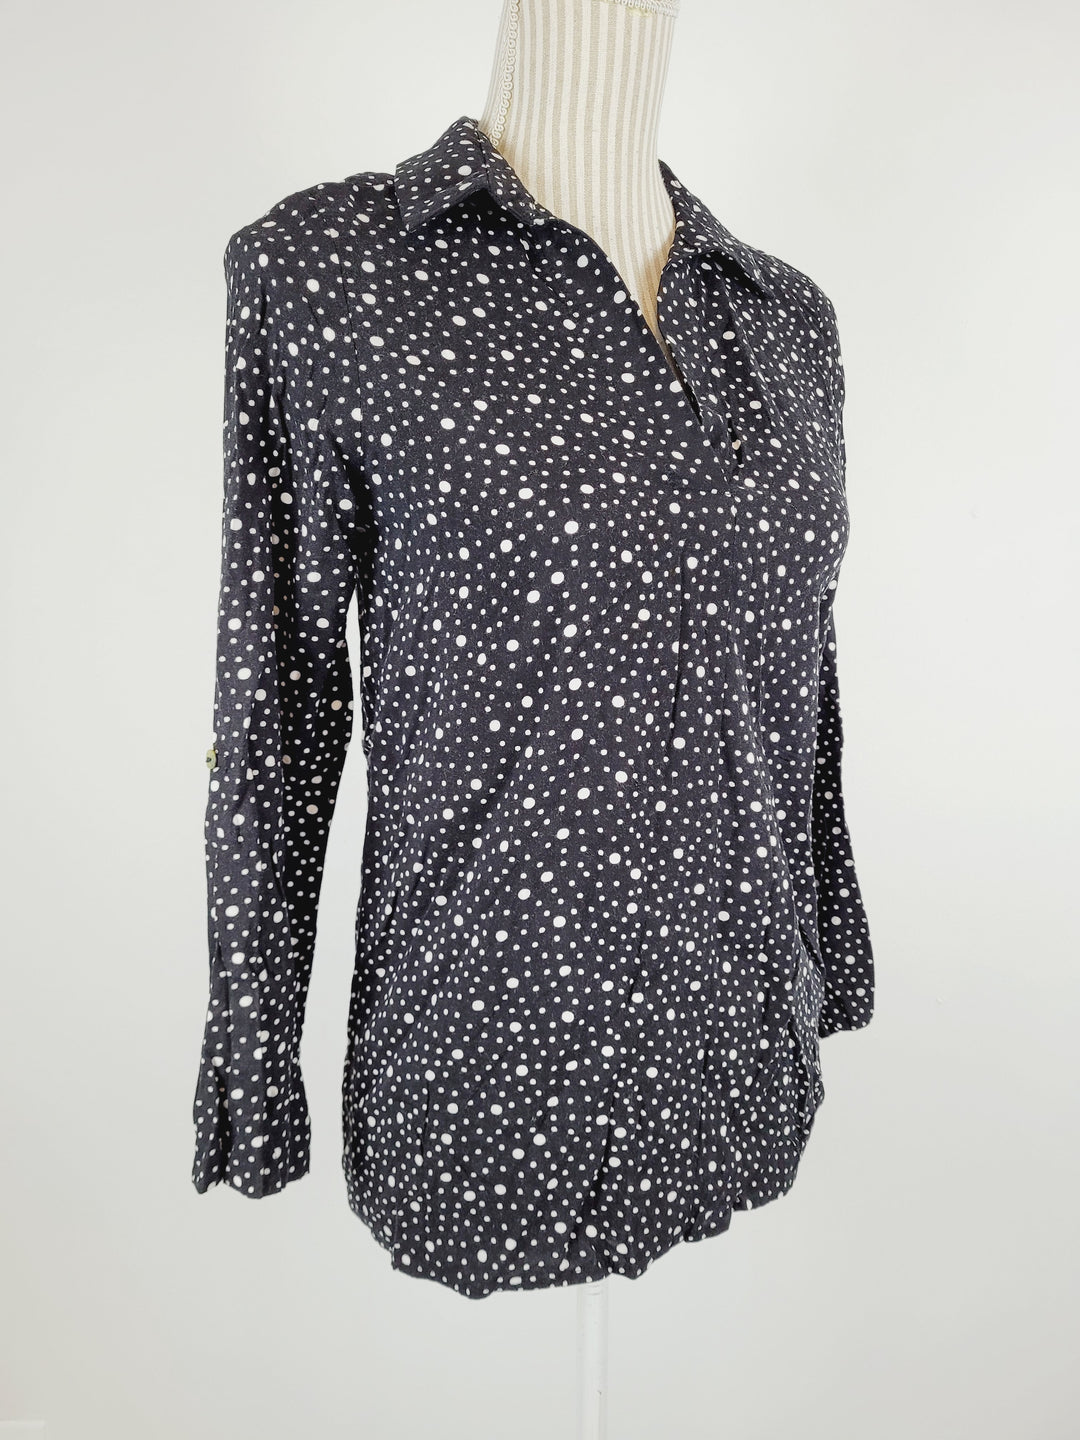 SUZY SHIER BLACK DOTTED BLOUSE LADIES SMALL EUC